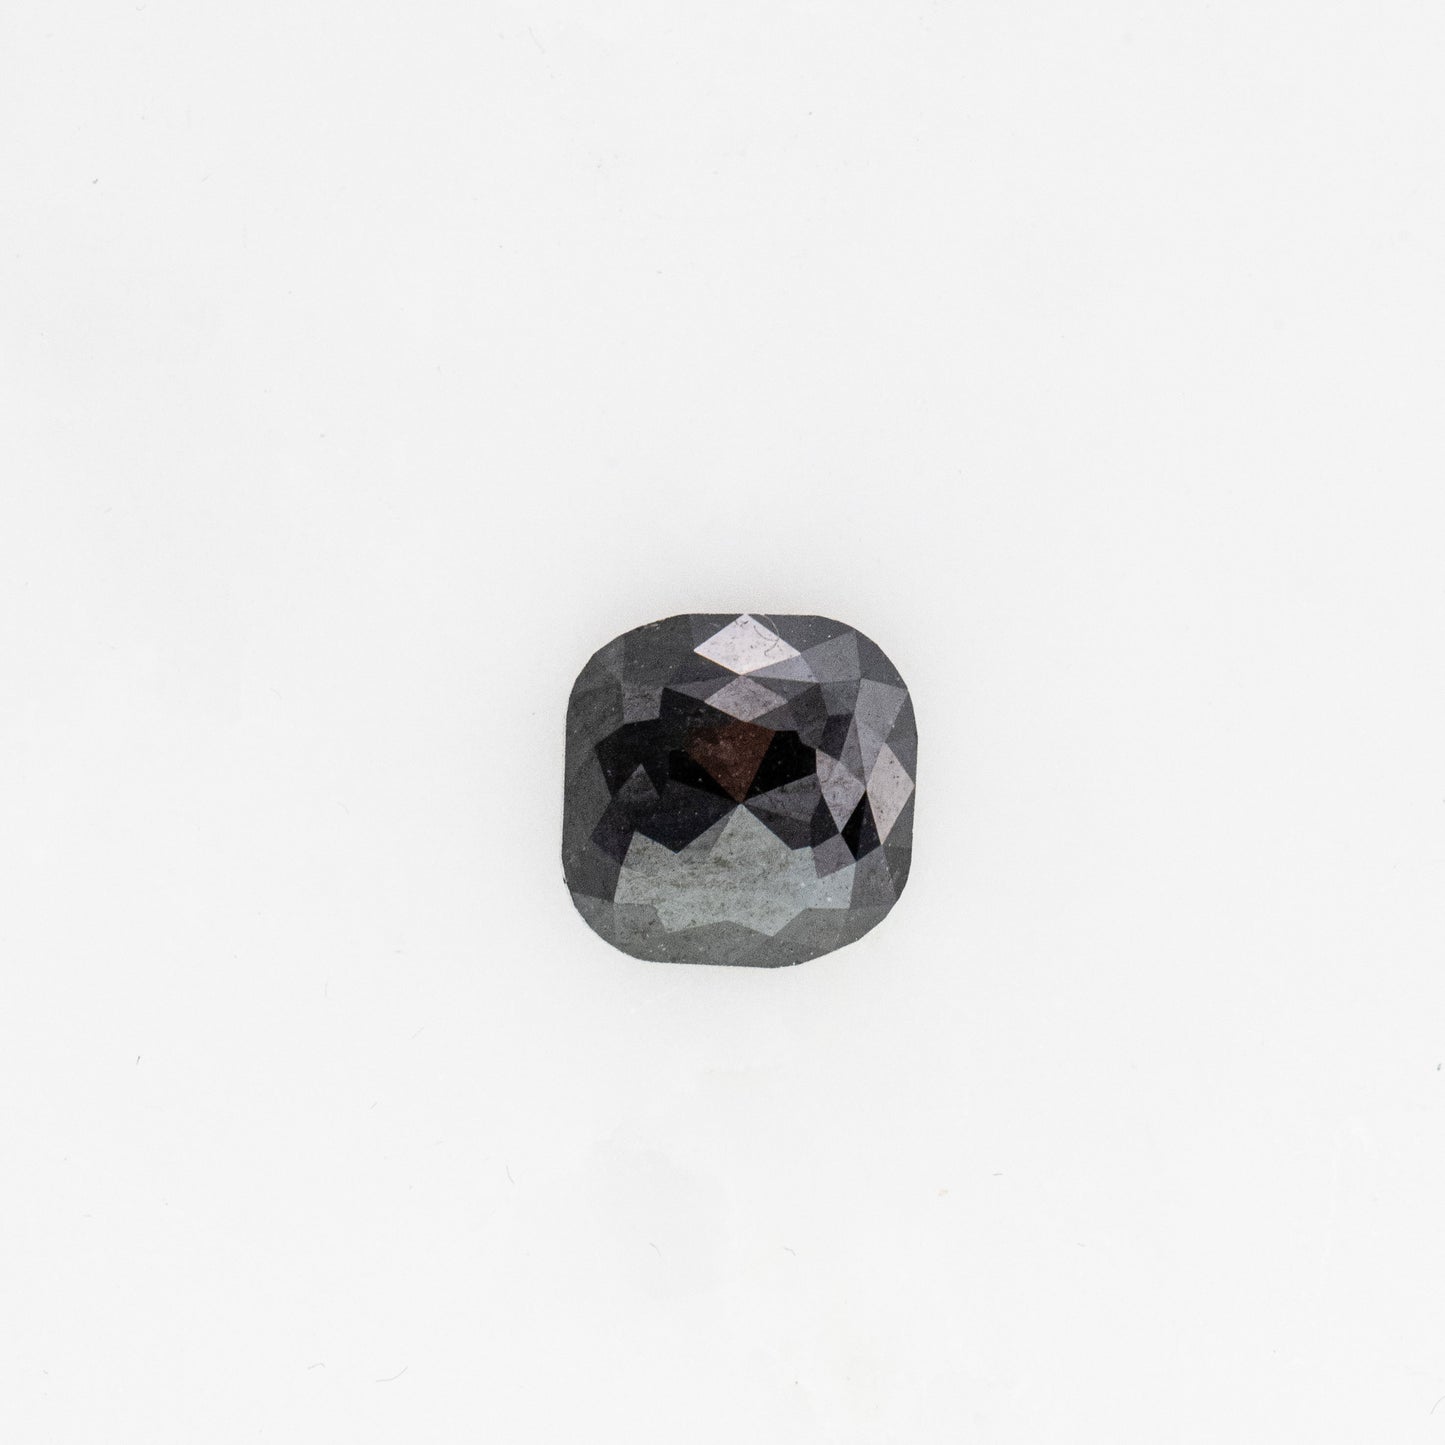 A handmade black rose cut diamond 7x7MM on a white background by Cassin Jewelry.